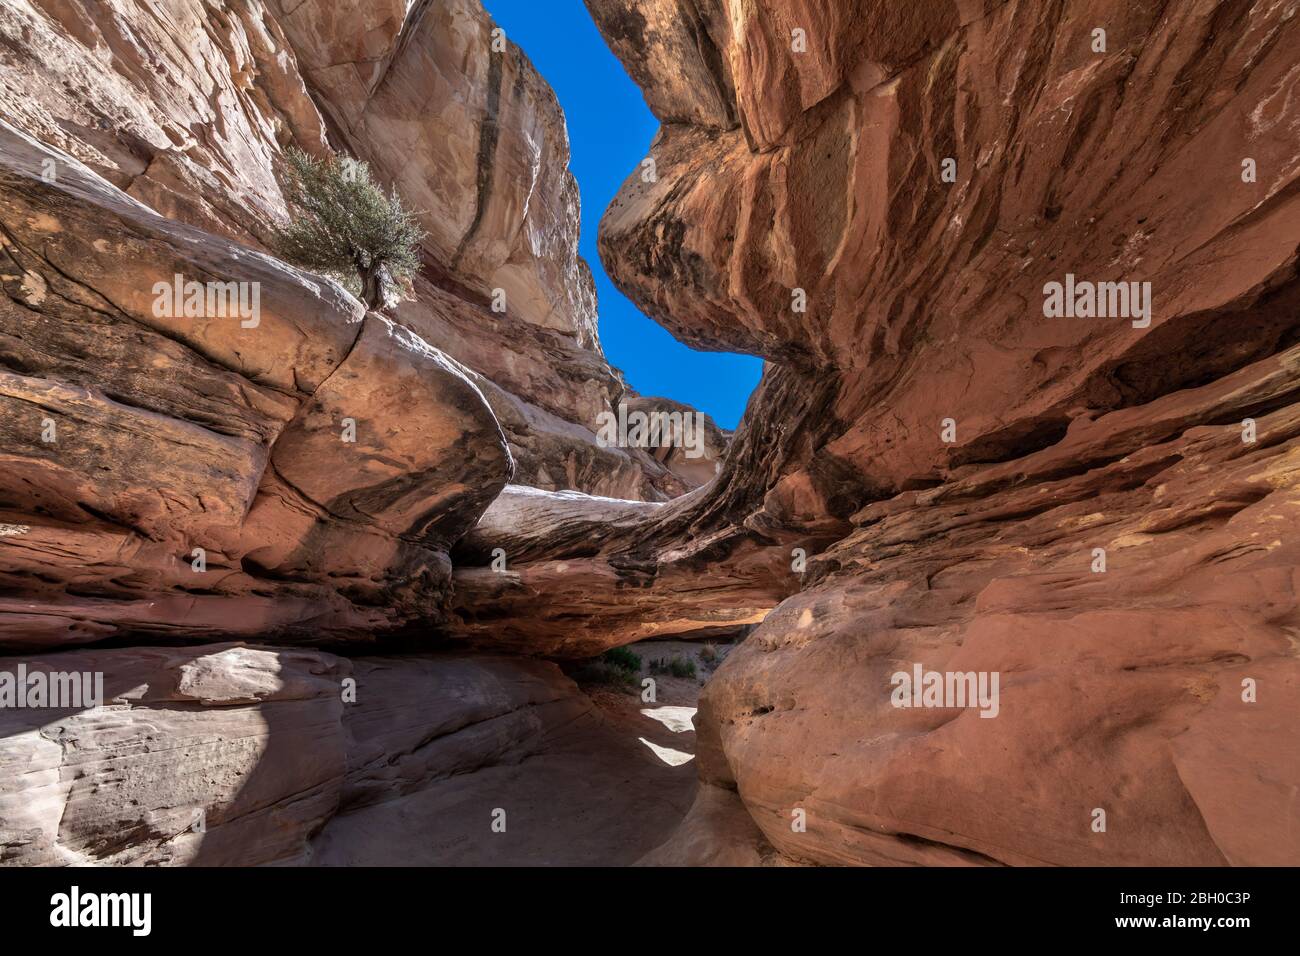 Interior of a slot canyon on the Hickman Bridge trail at Capitol Reef National Park, with its surface carved and twisted by erosion Stock Photo